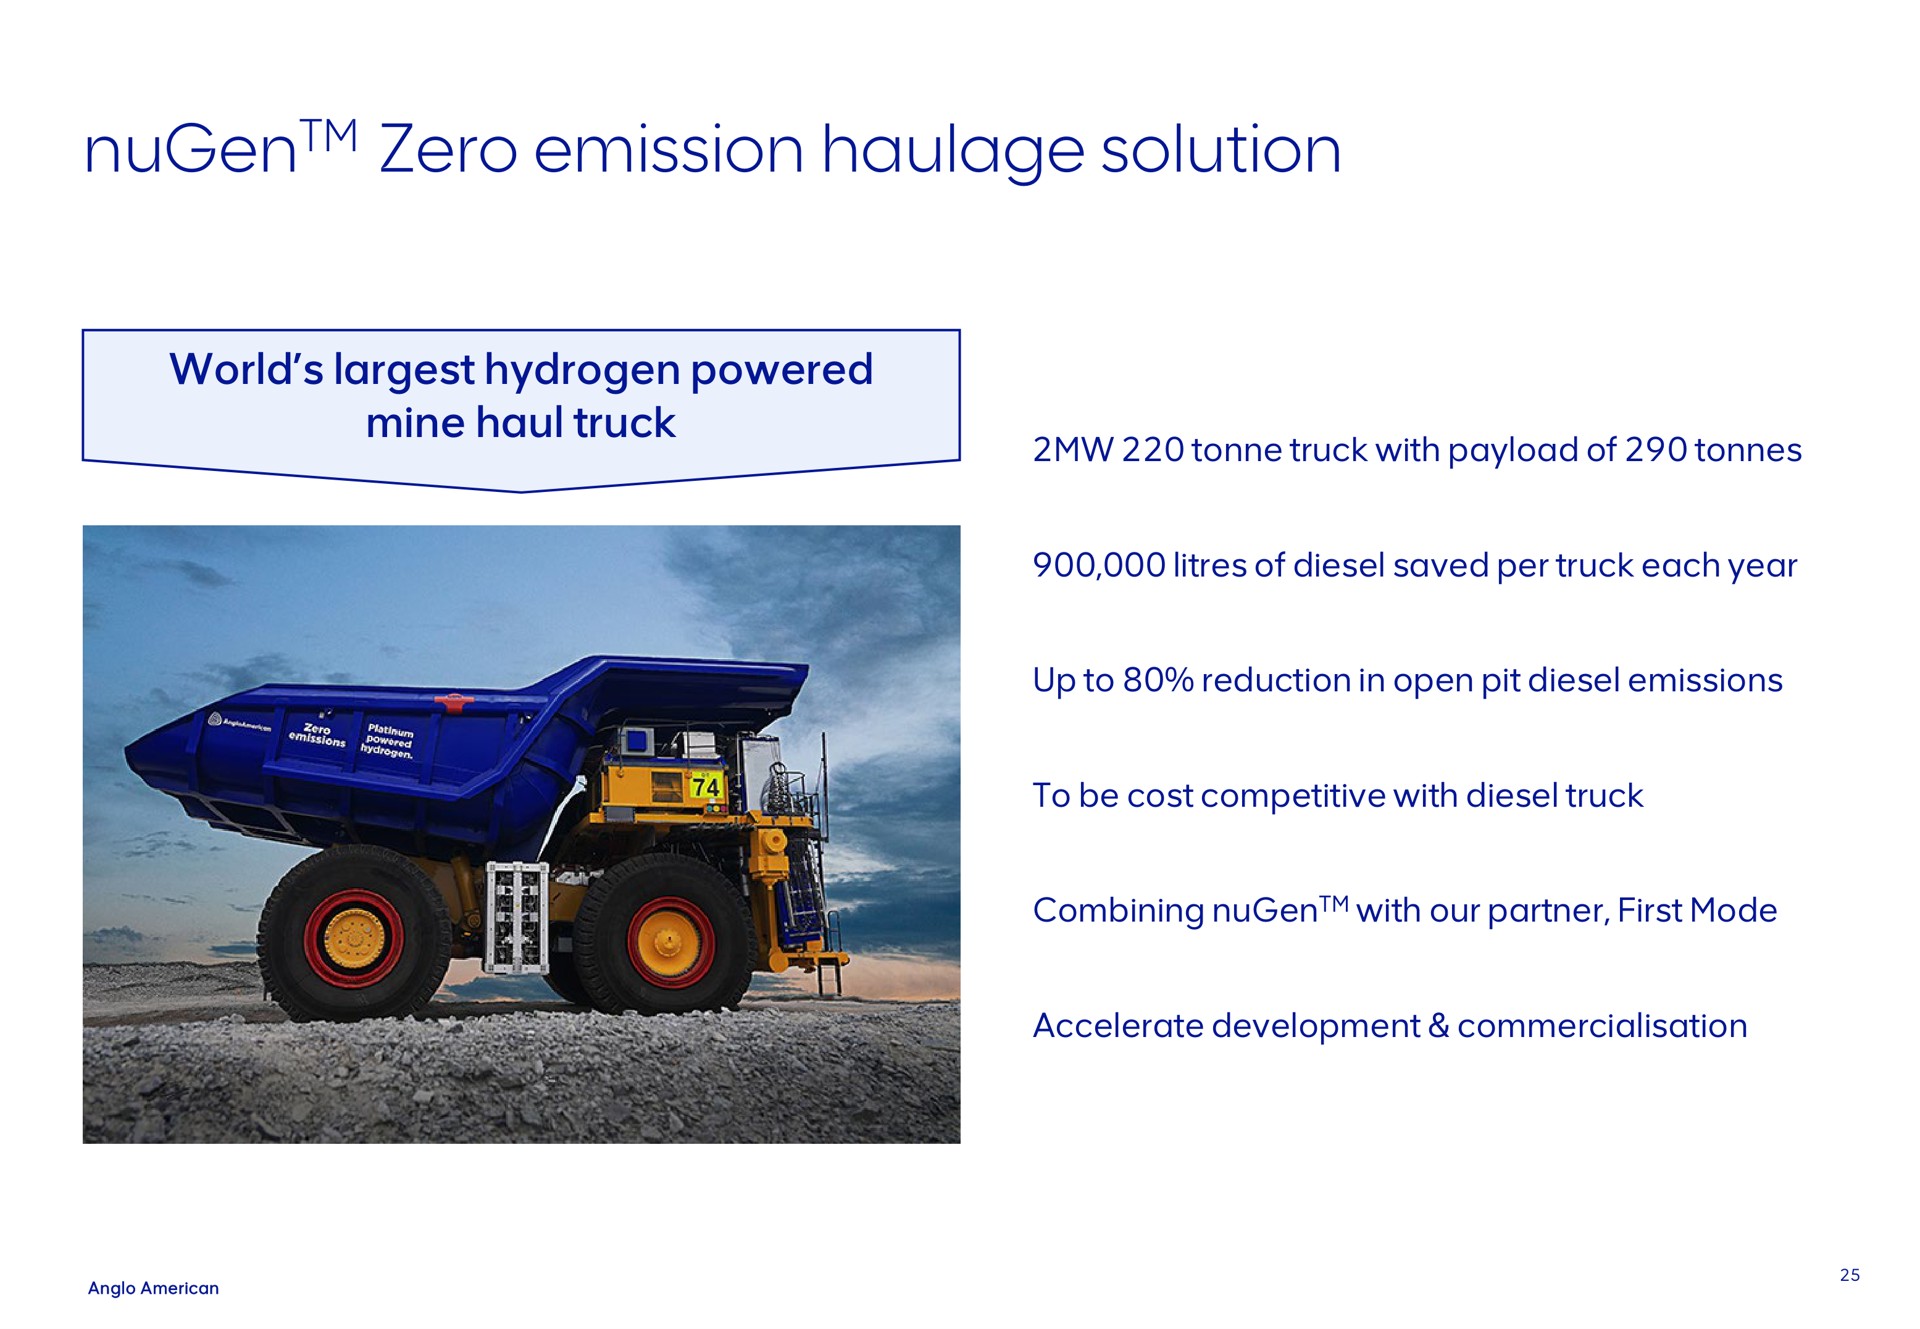 zero emission haulage solution world hydrogen powered mine haul truck truck with of of diesel saved per truck each year up to reduction in open pit diesel emissions to be cost competitive with diesel truck combining with our partner first mode accelerate development | AngloAmerican